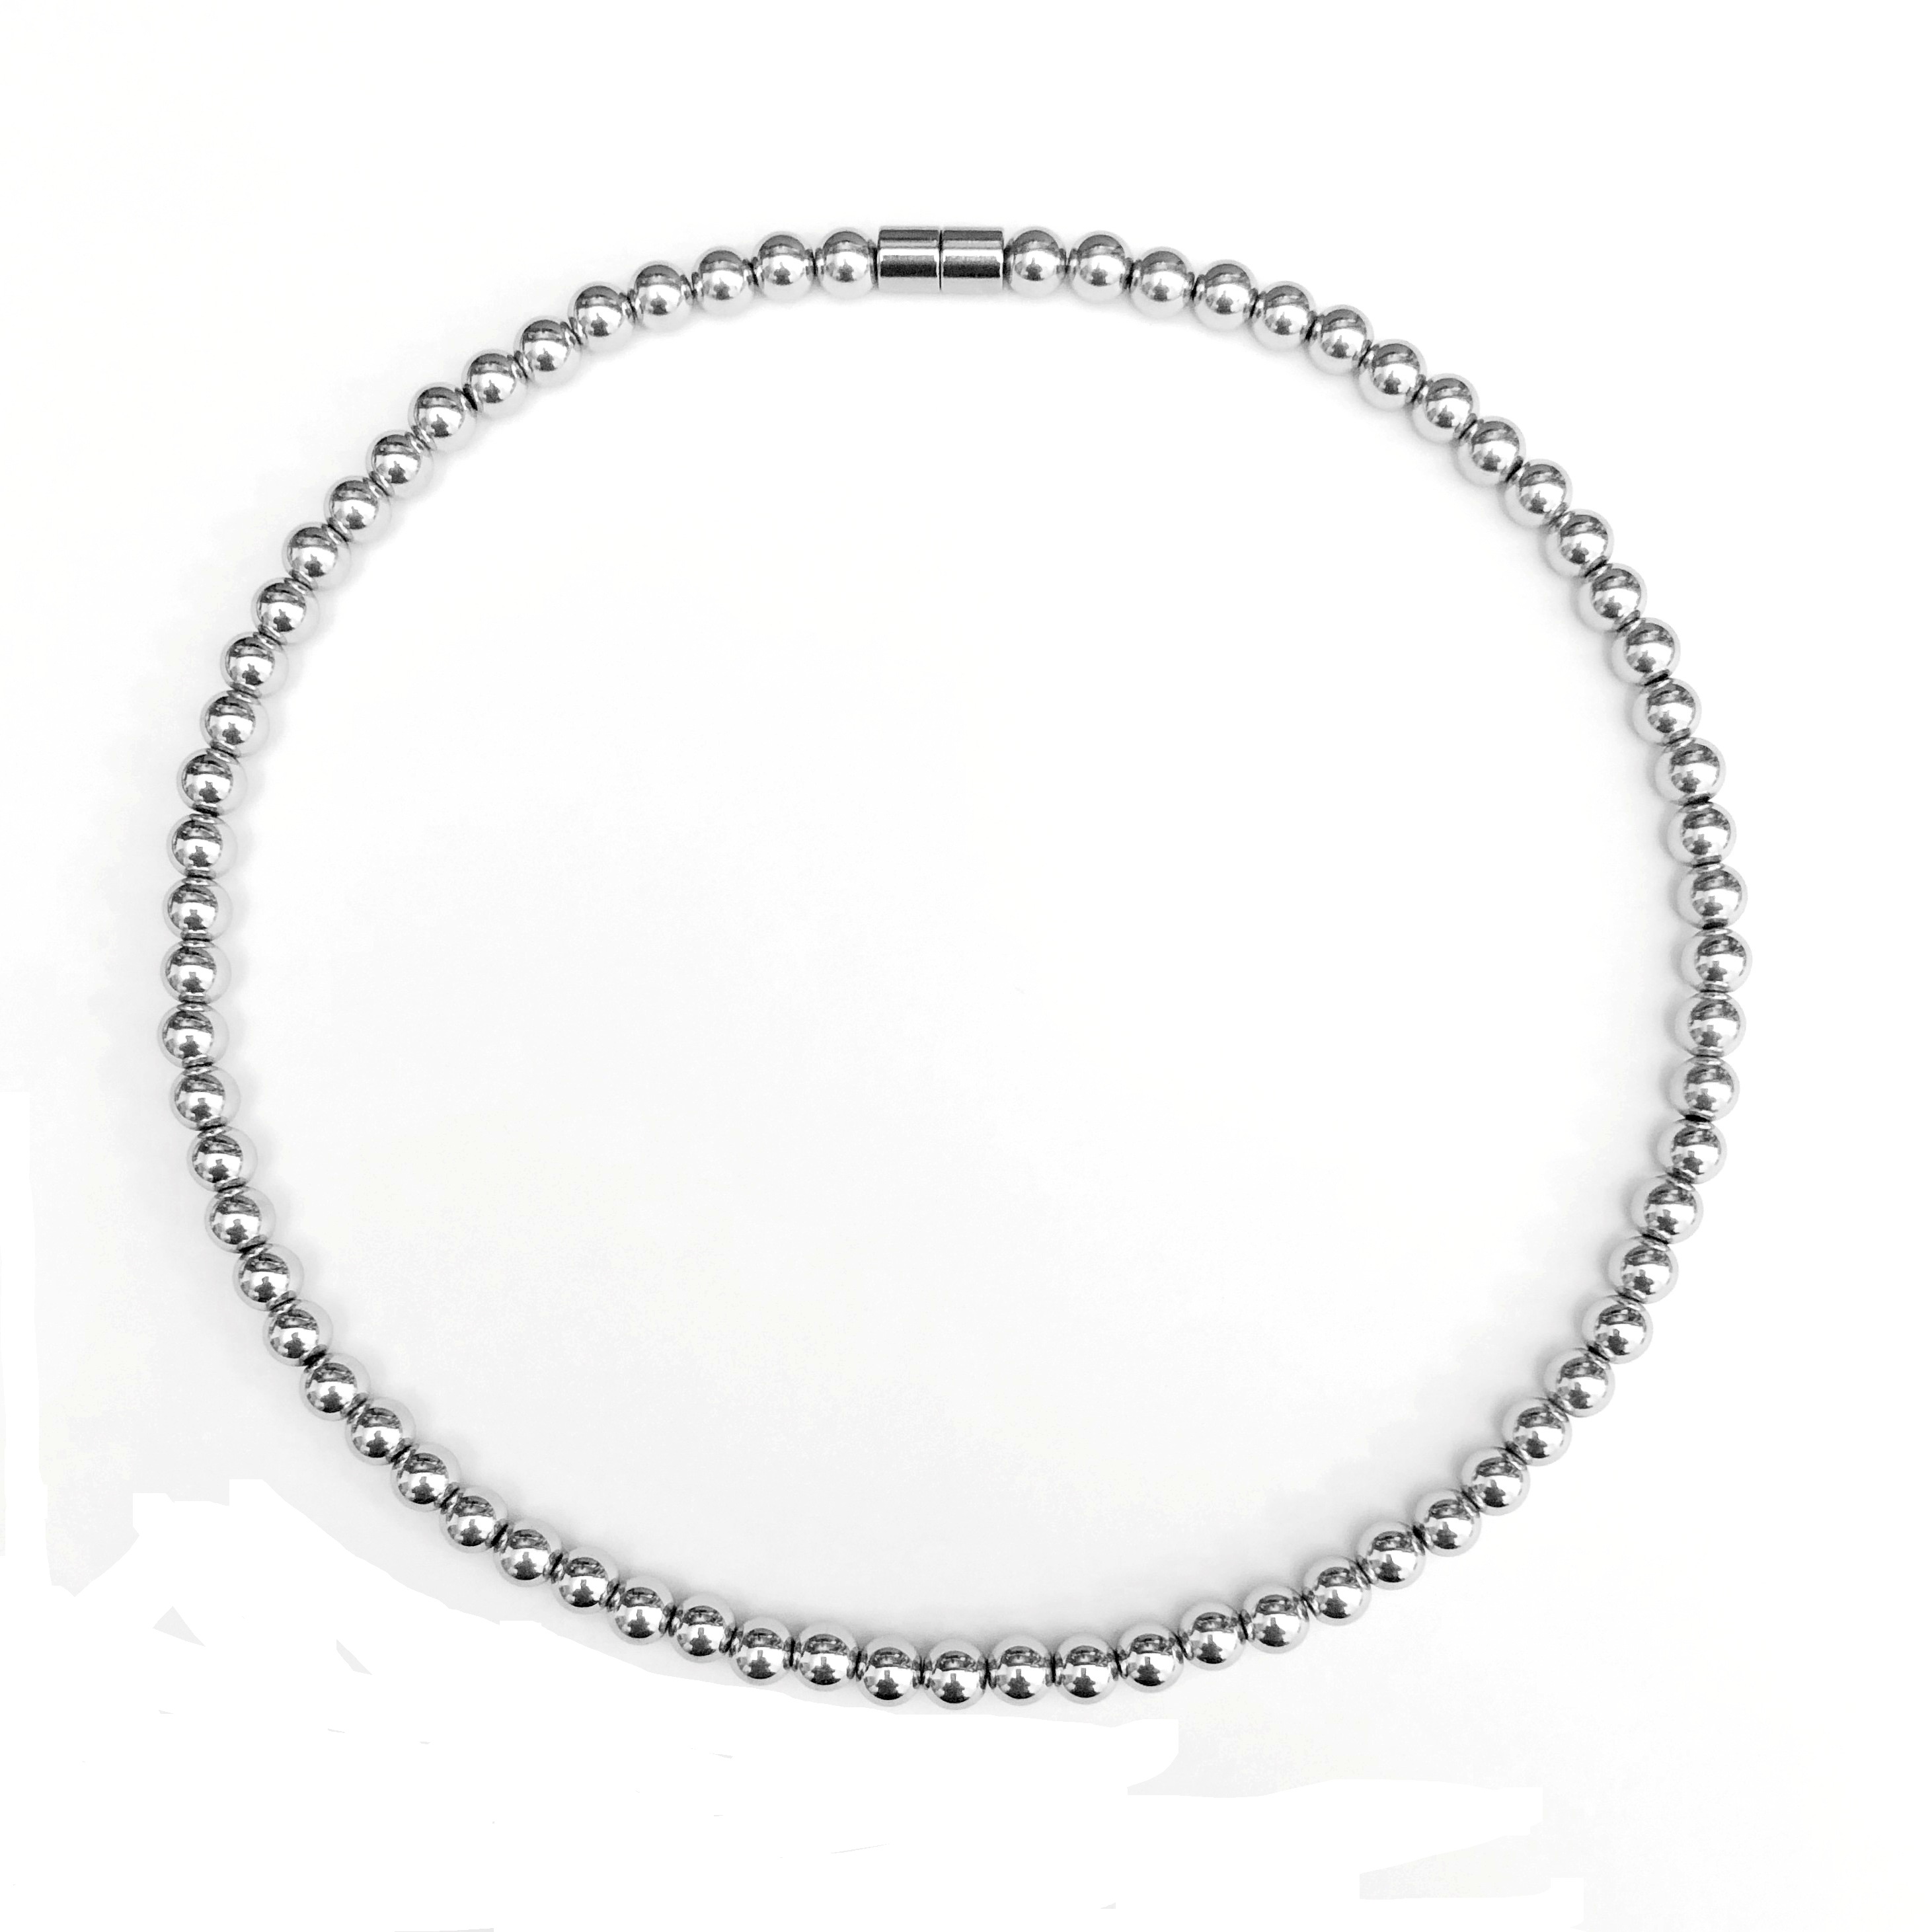 All 6mm Silver Magnetic Beads Magneti Magnetic Necklace #MN-00001